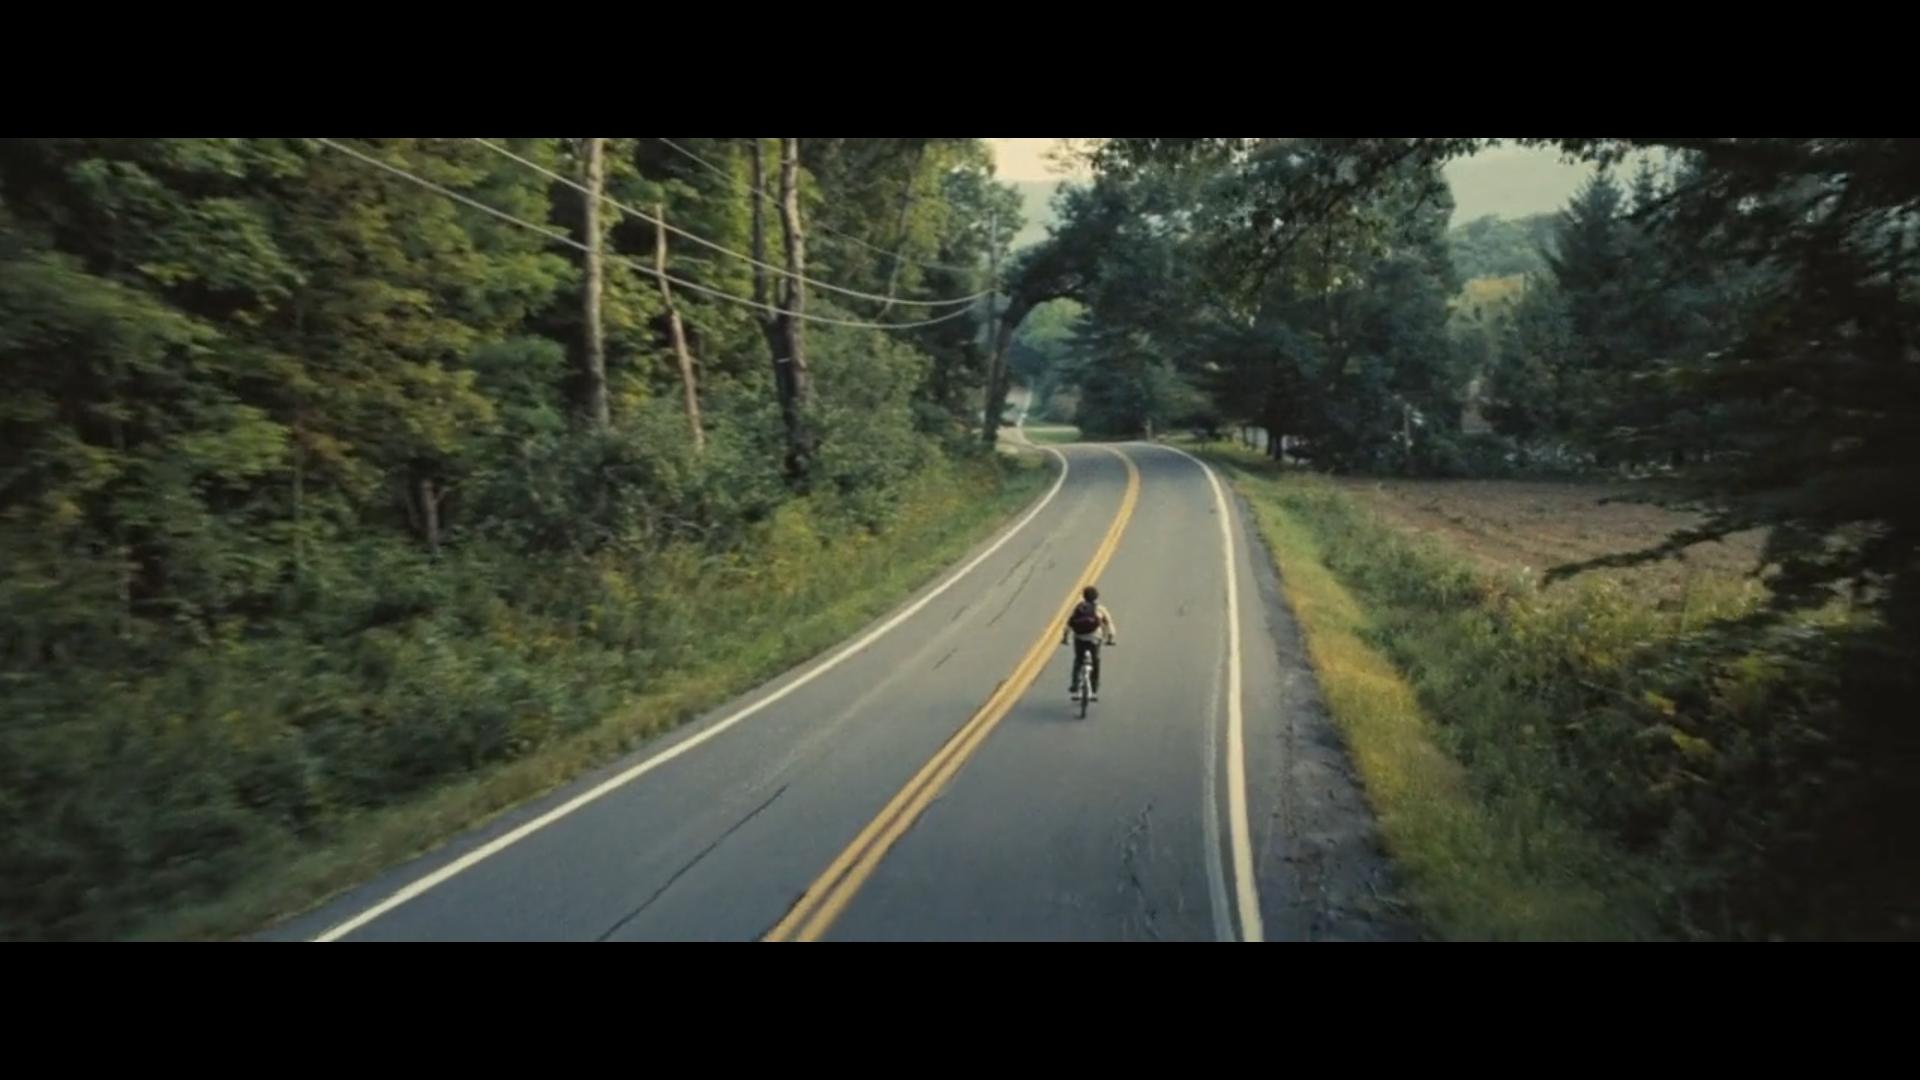 My Favorite Scene From the Movie The Place Beyond the Pines (1920x1080)